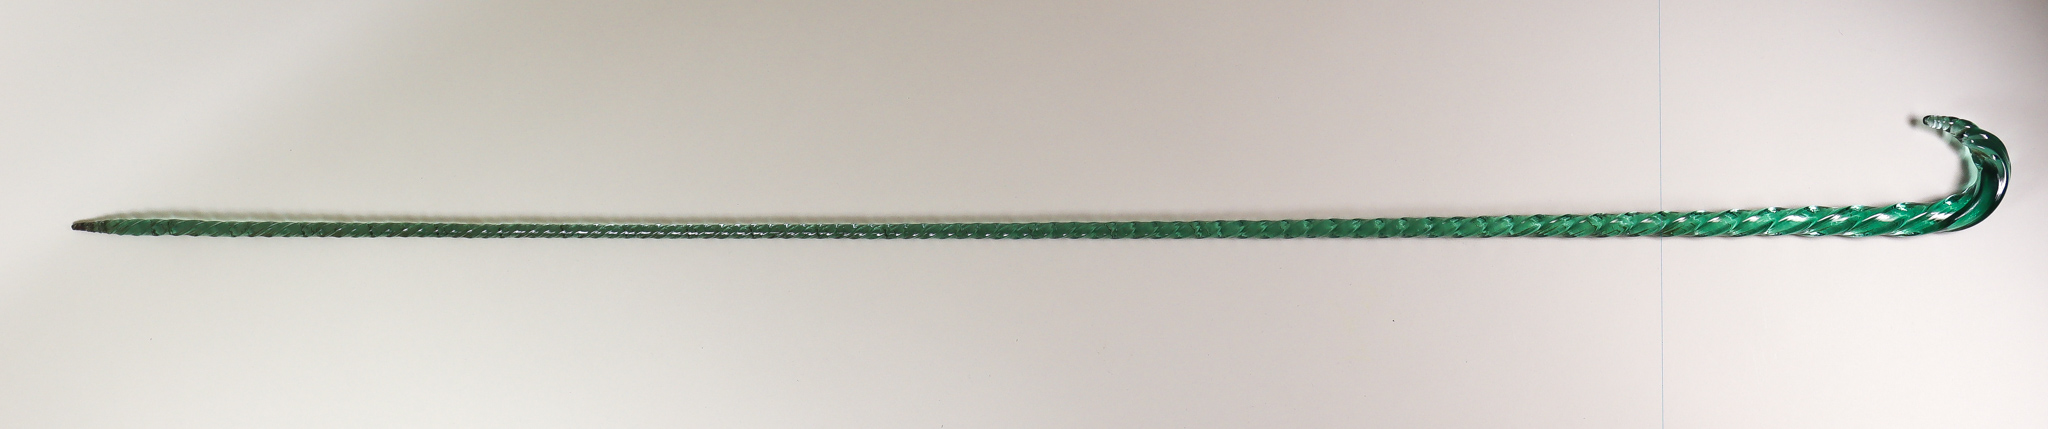 A Novelty English Glass Walking Stick, Mid-19th Century, of green tint, with twist to glass, 44.